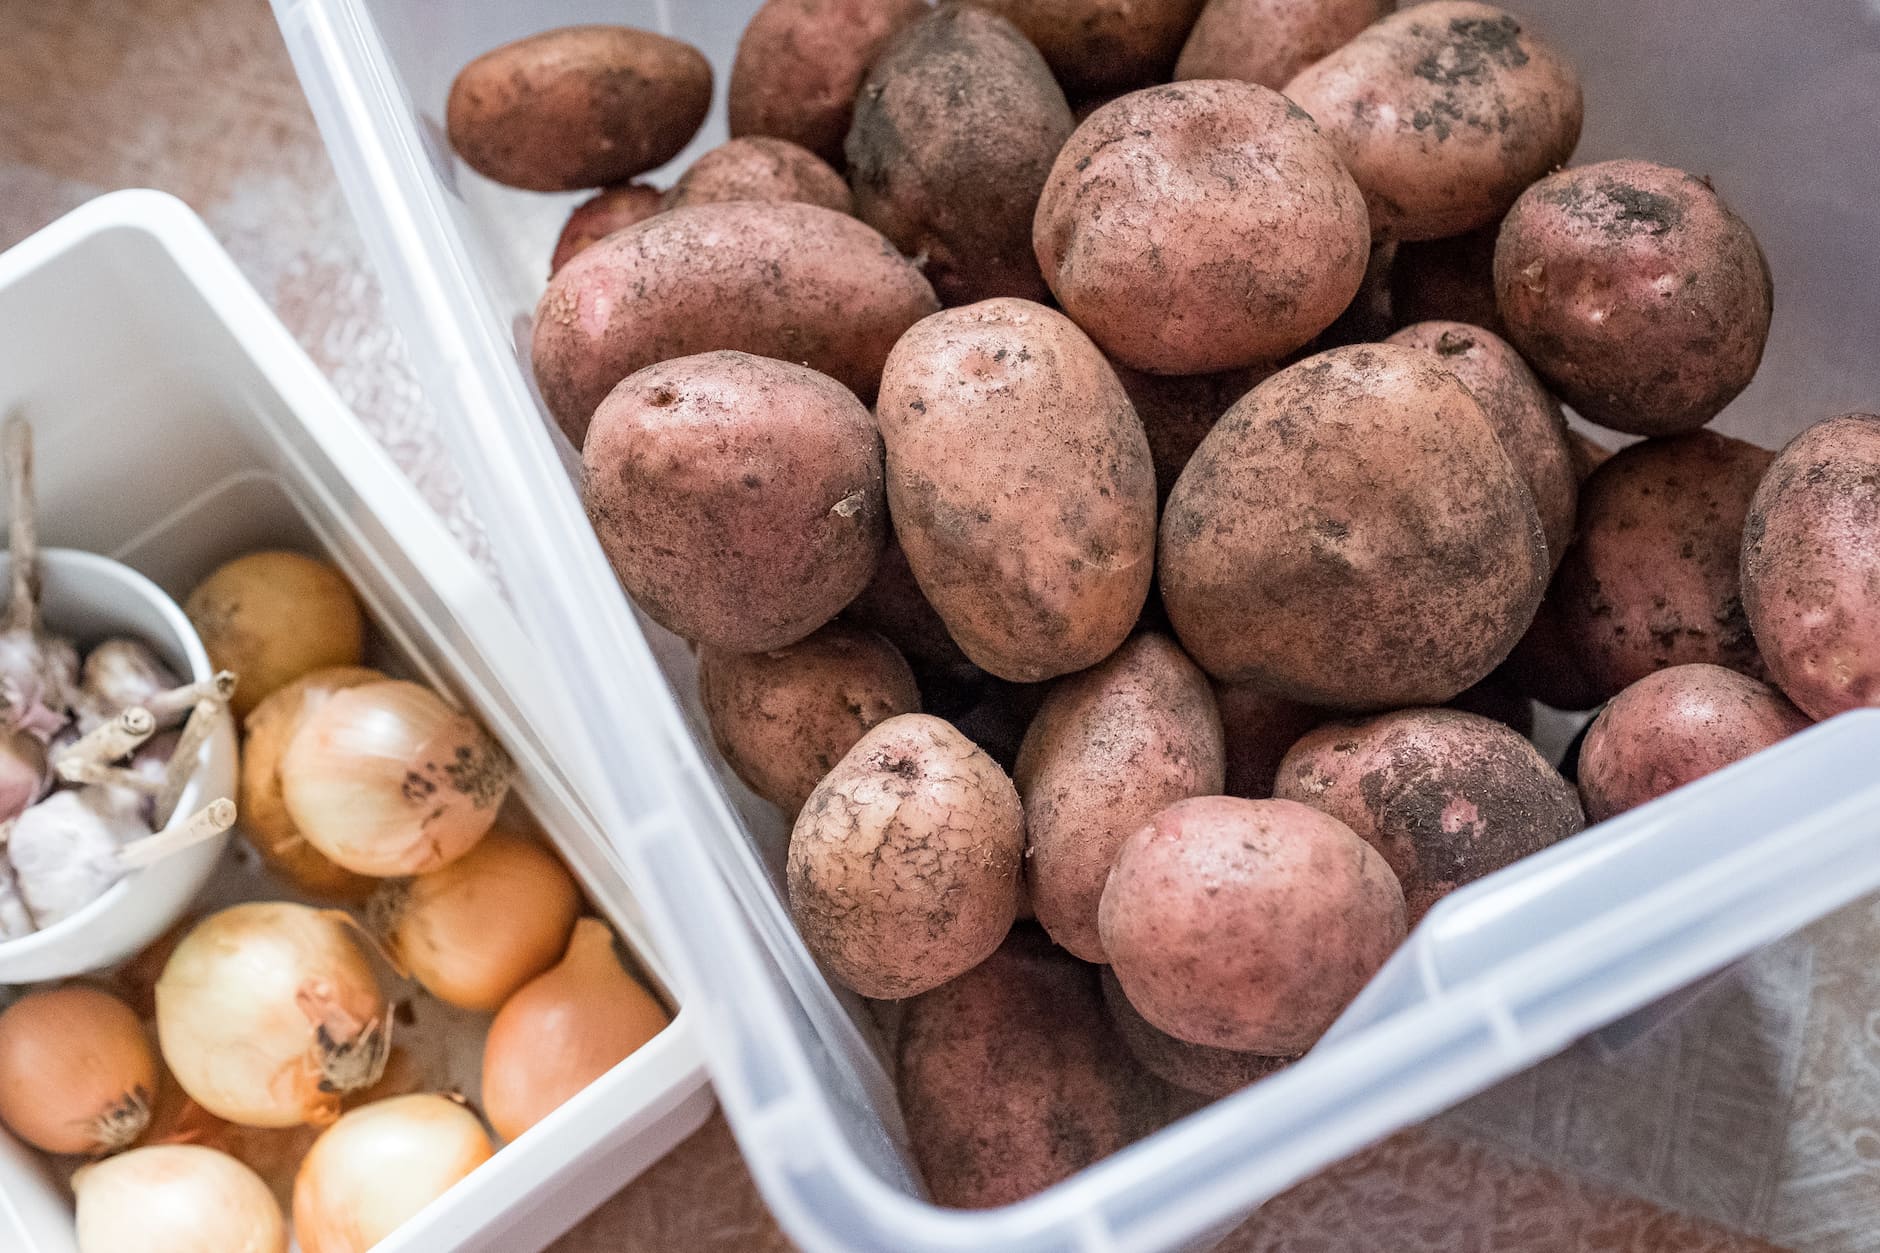 Tips For Storing Potatoes Onions And Garlic Through The Winter Farmers Almanac